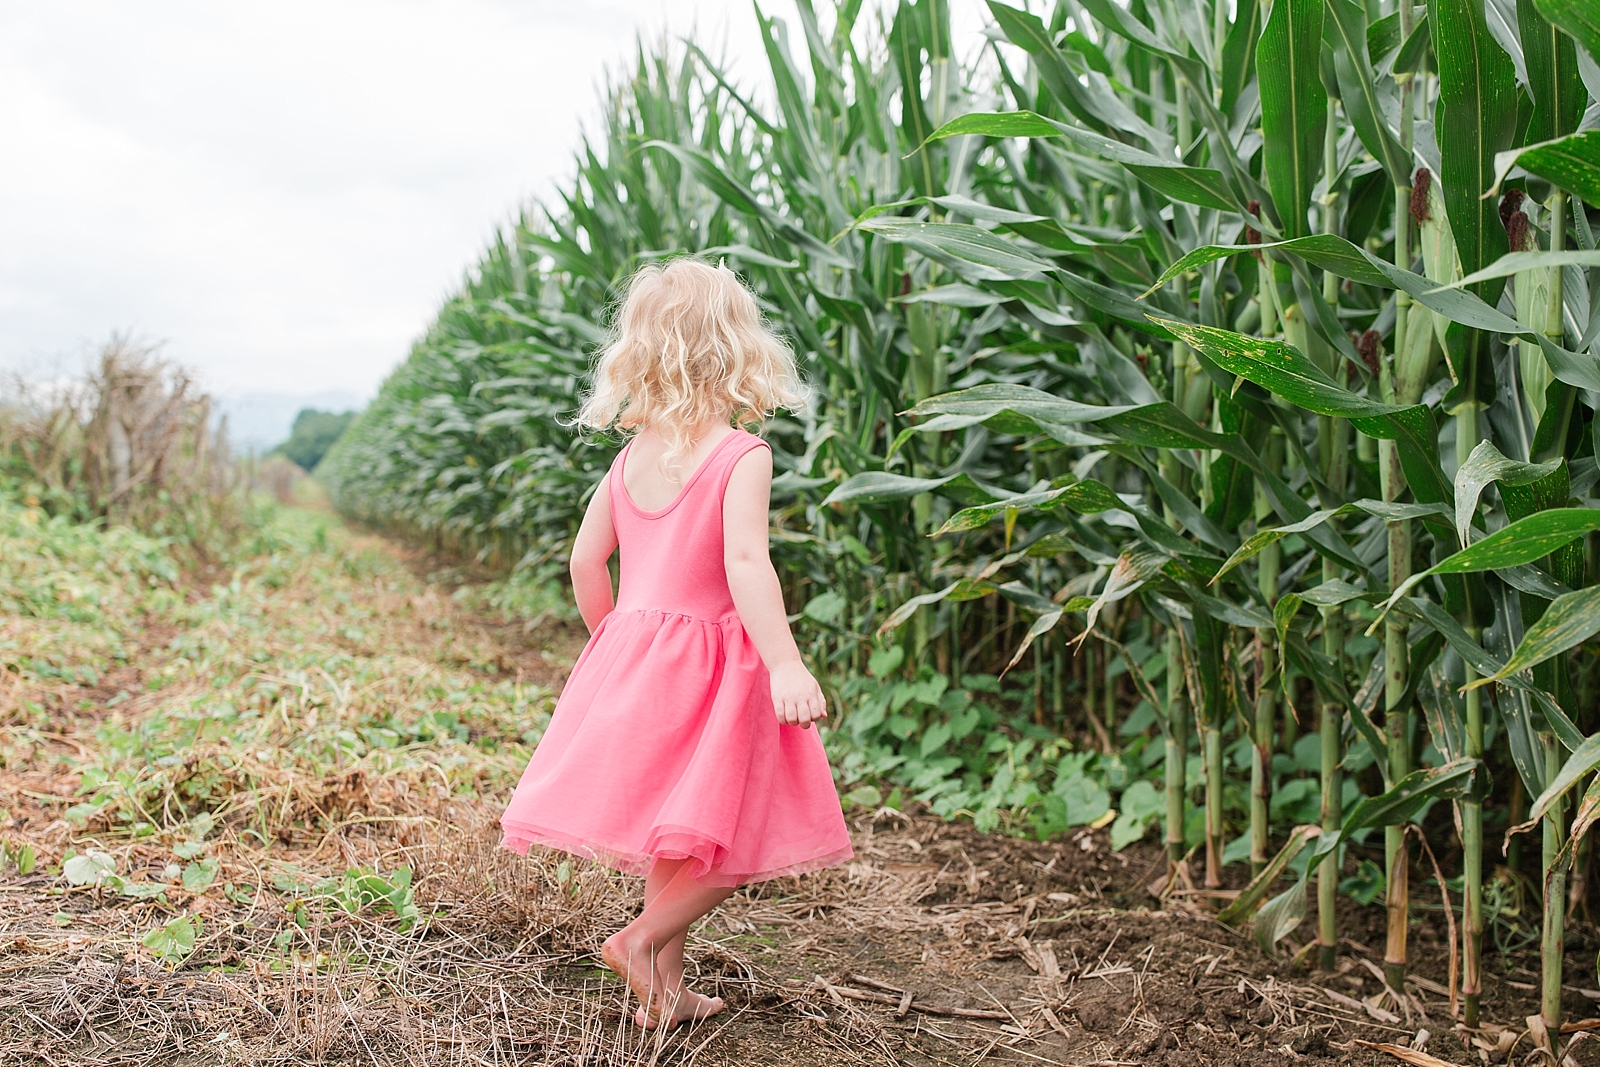 Little girl spinning in a cornfield barefoot photo